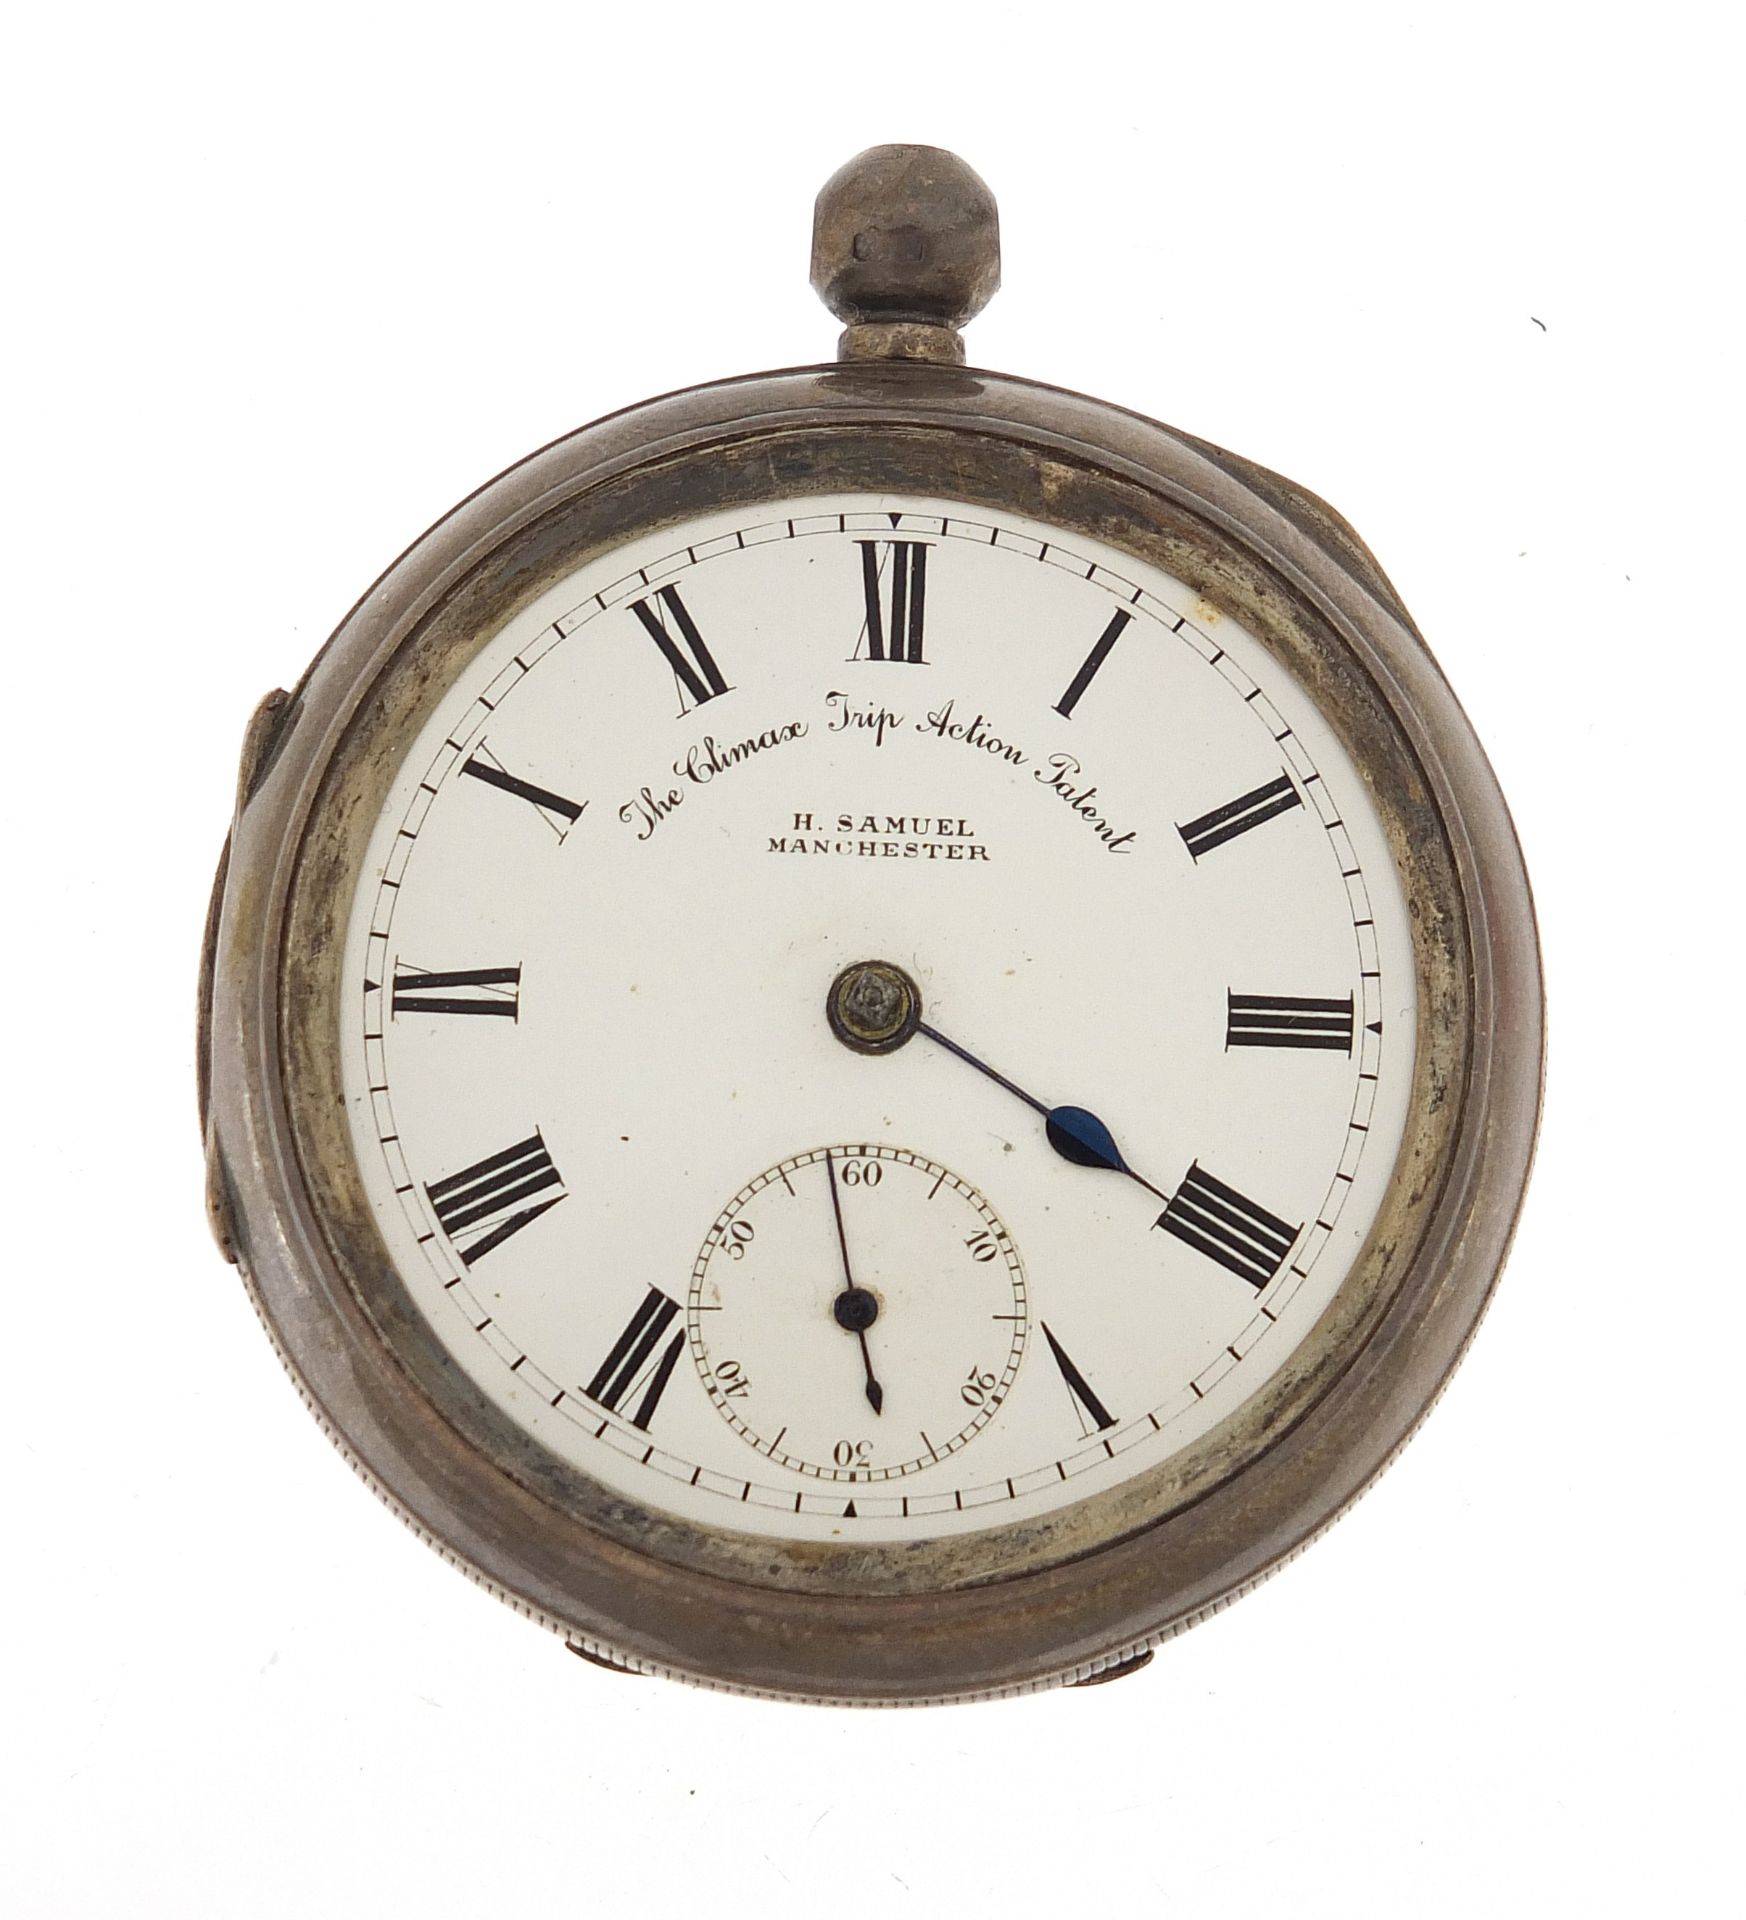 The Climax Trip Action Patent, gentlemen's silver open face pocket watch by H Samuel, the movement